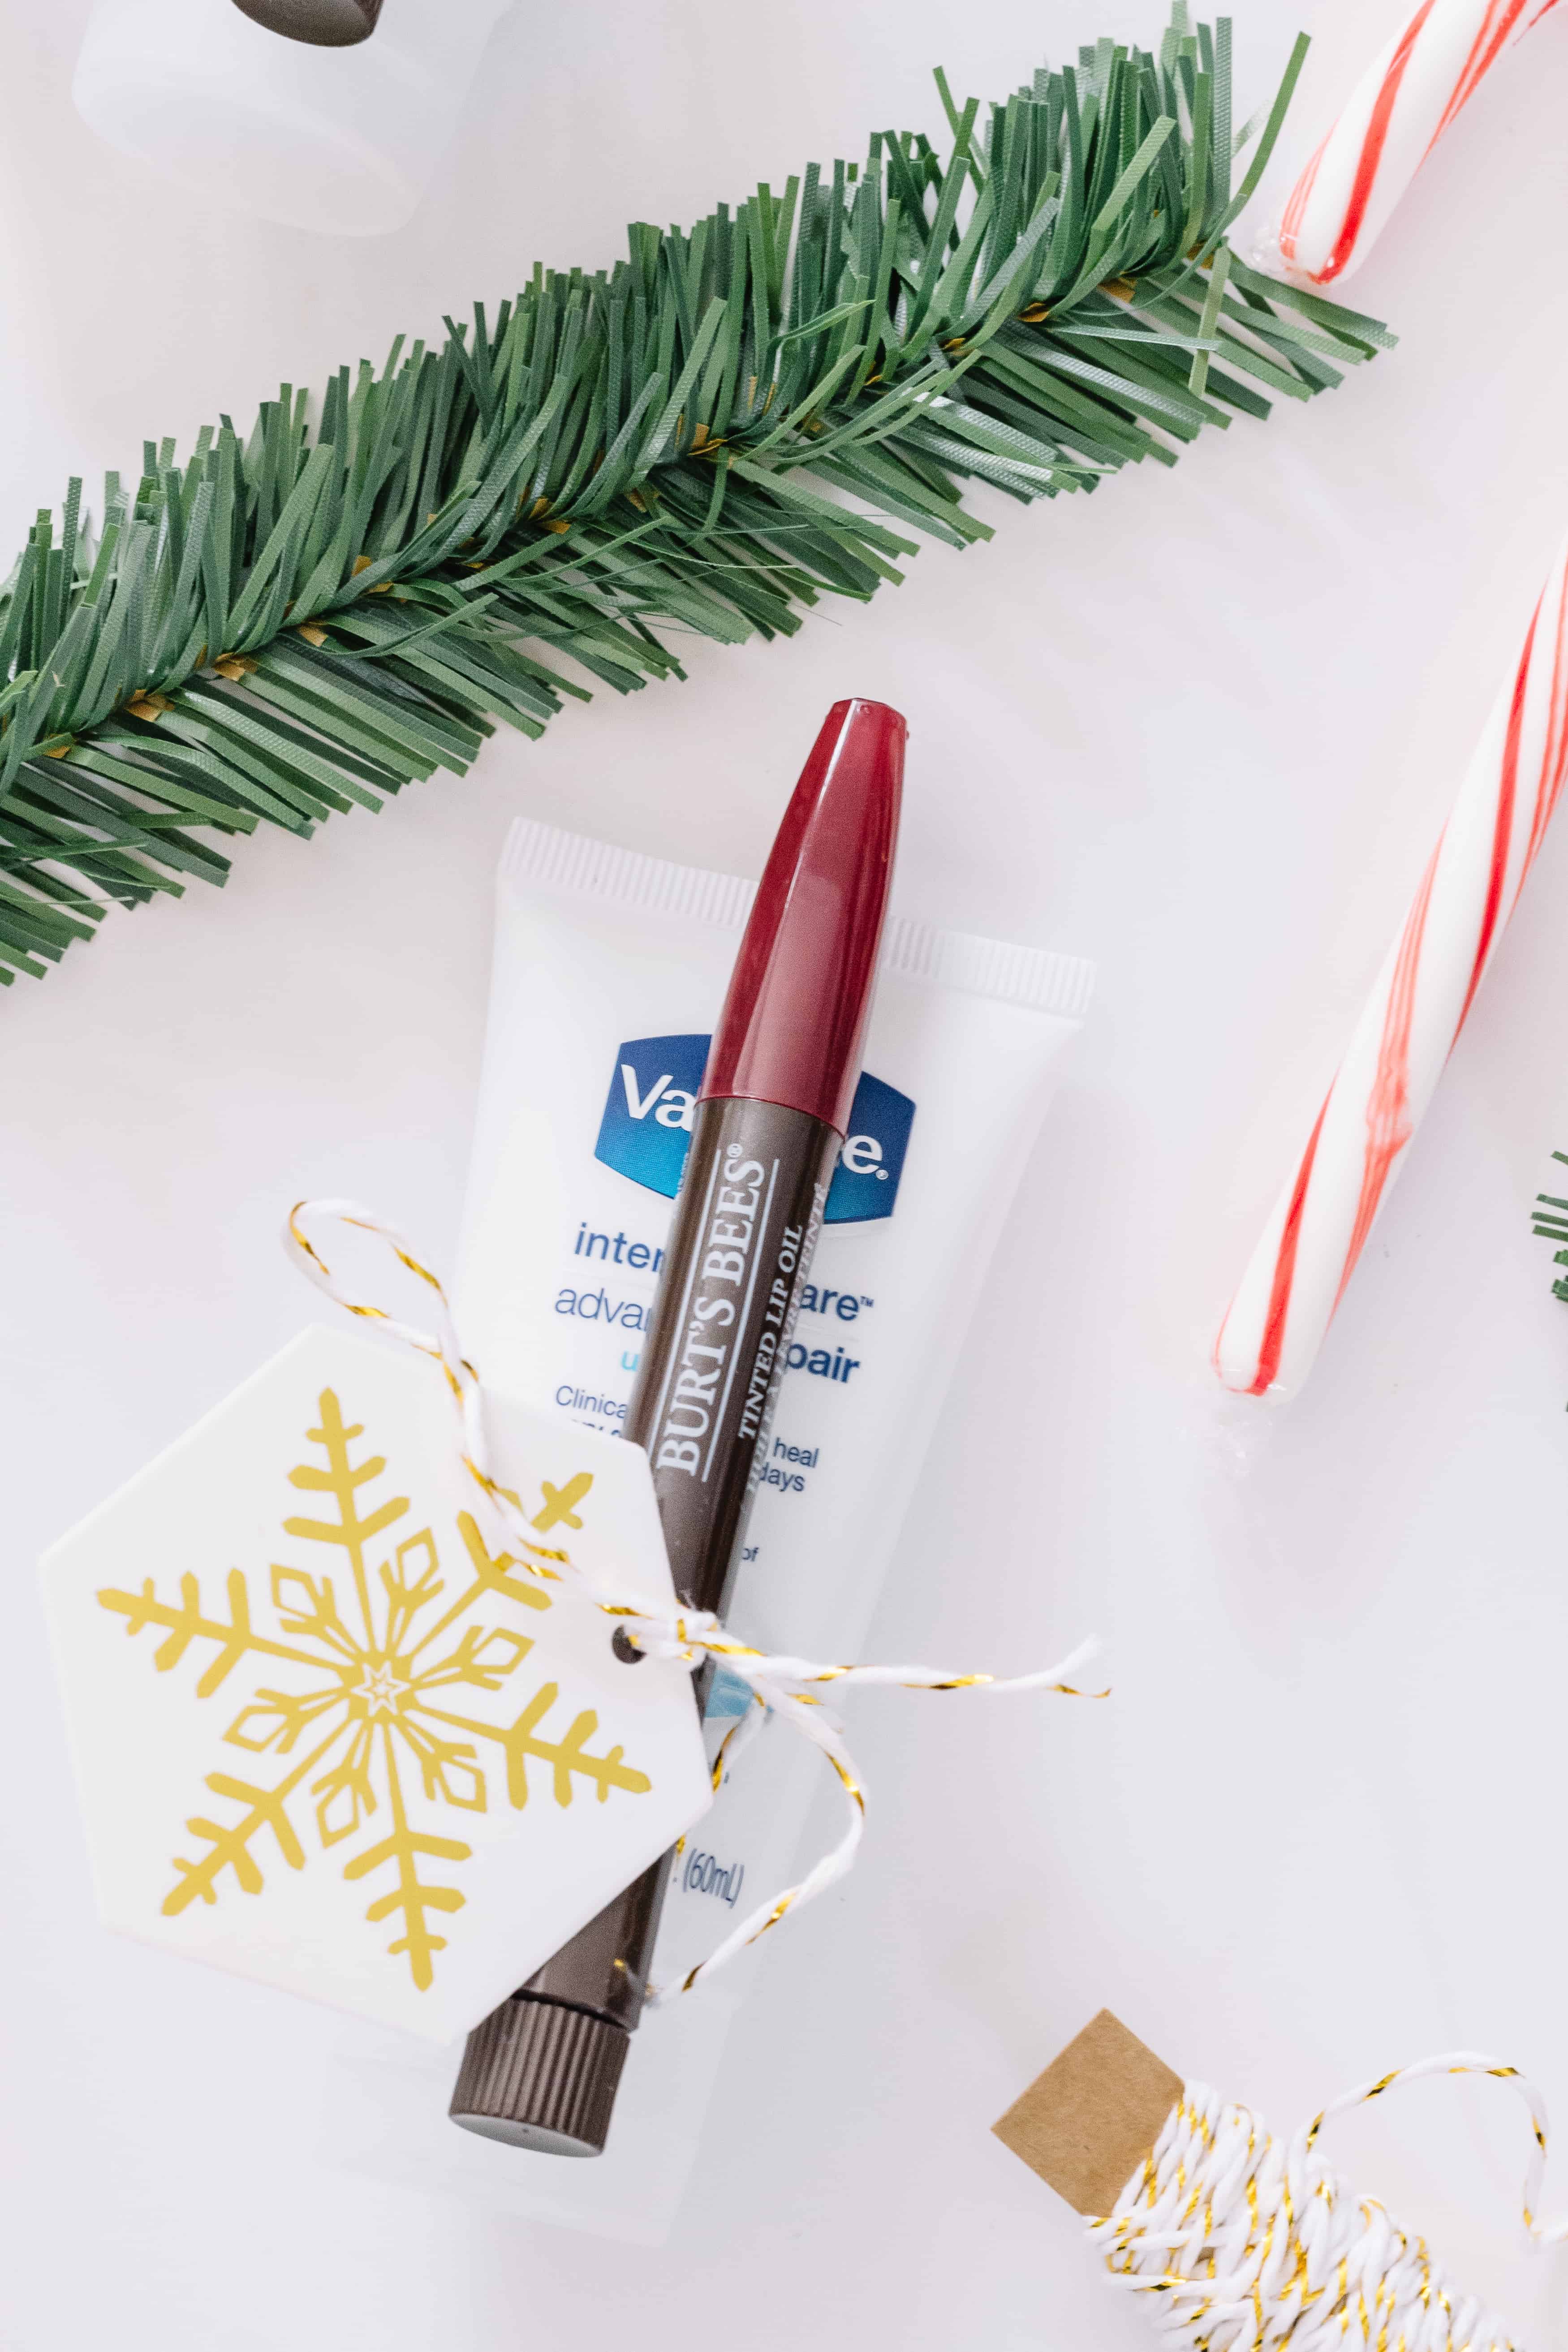 This DIY Lip & Hand Cream Gift Set is The Perfect Winter Duo! I know i would LOVE to receive this as a beauty gift this Christmas! Need a holiday beauty gift for a friend, family member, teacher, stylist, or hostess?! Try this cute gift idea!